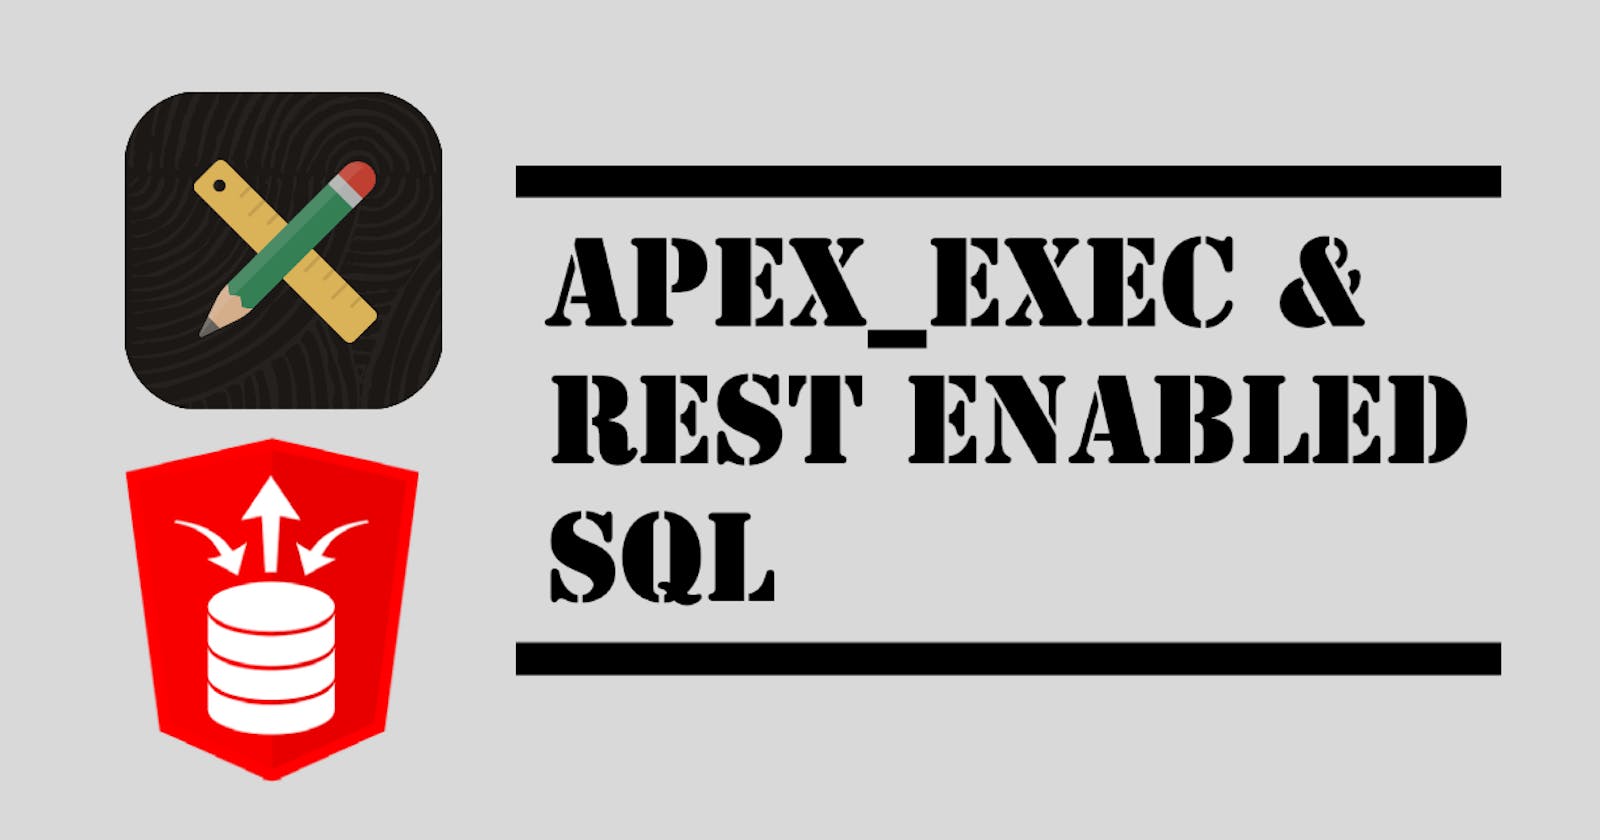 How To Run Code Remotely Using APEX_EXEC & REST Enabled SQL